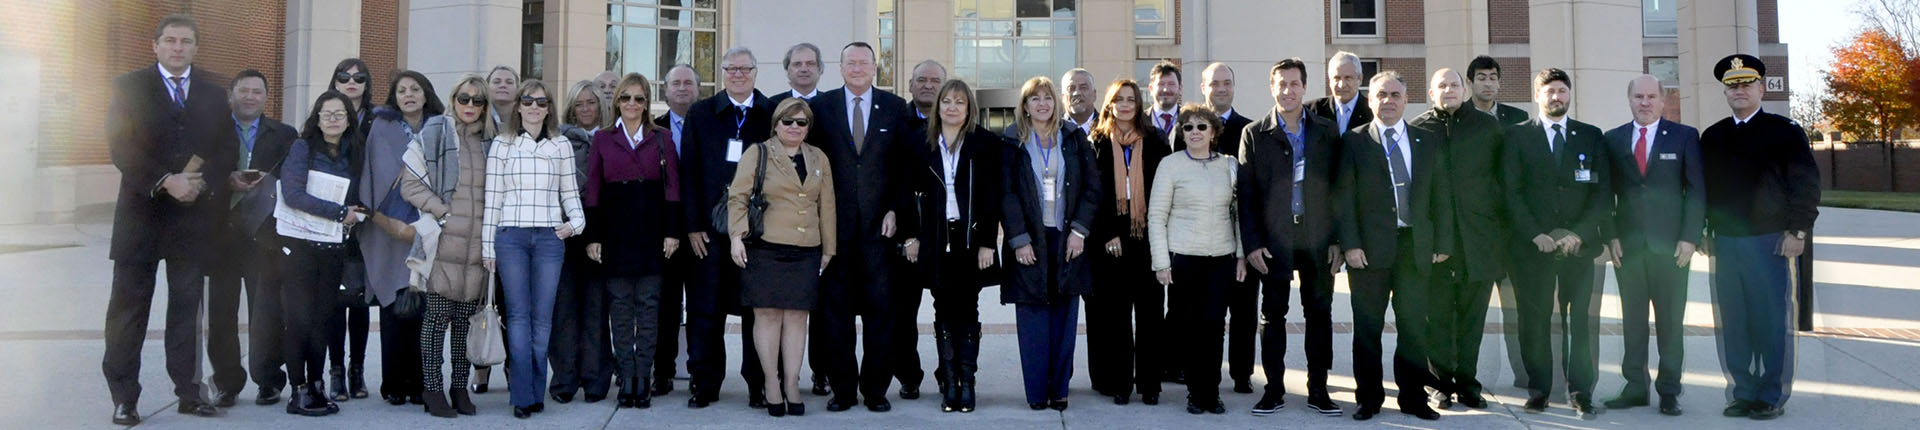 Argentine American Dialogue - Group Photo